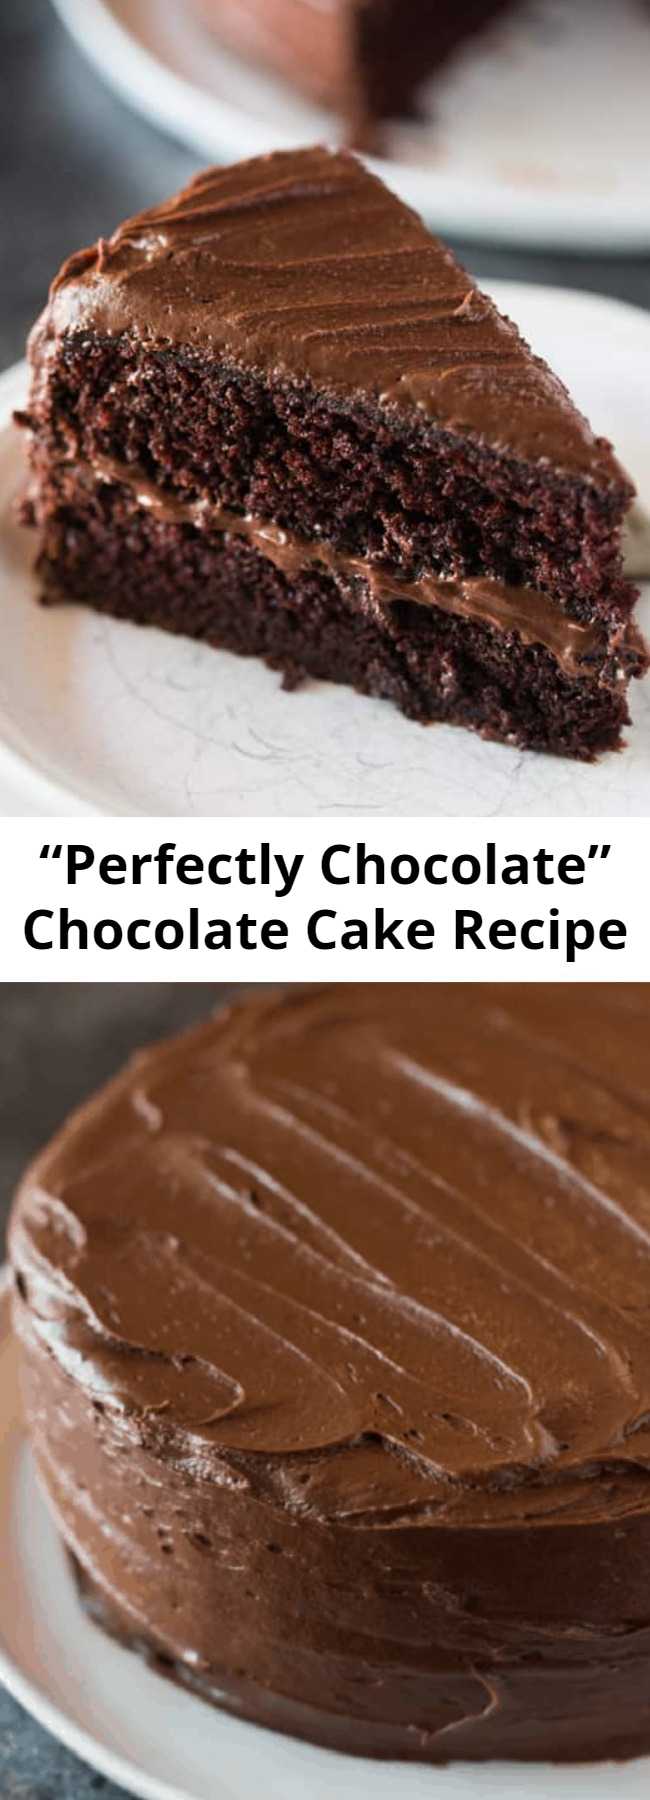 “Perfectly Chocolate” Chocolate Cake Recipe - Hershey’s “perfectly chocolate” Chocolate Cake with 5 ingredient chocolate frosting is our favorite homemade chocolate cake recipe! Extra moist, with a perfect rich chocolate flavor and tender, smooth crumb.